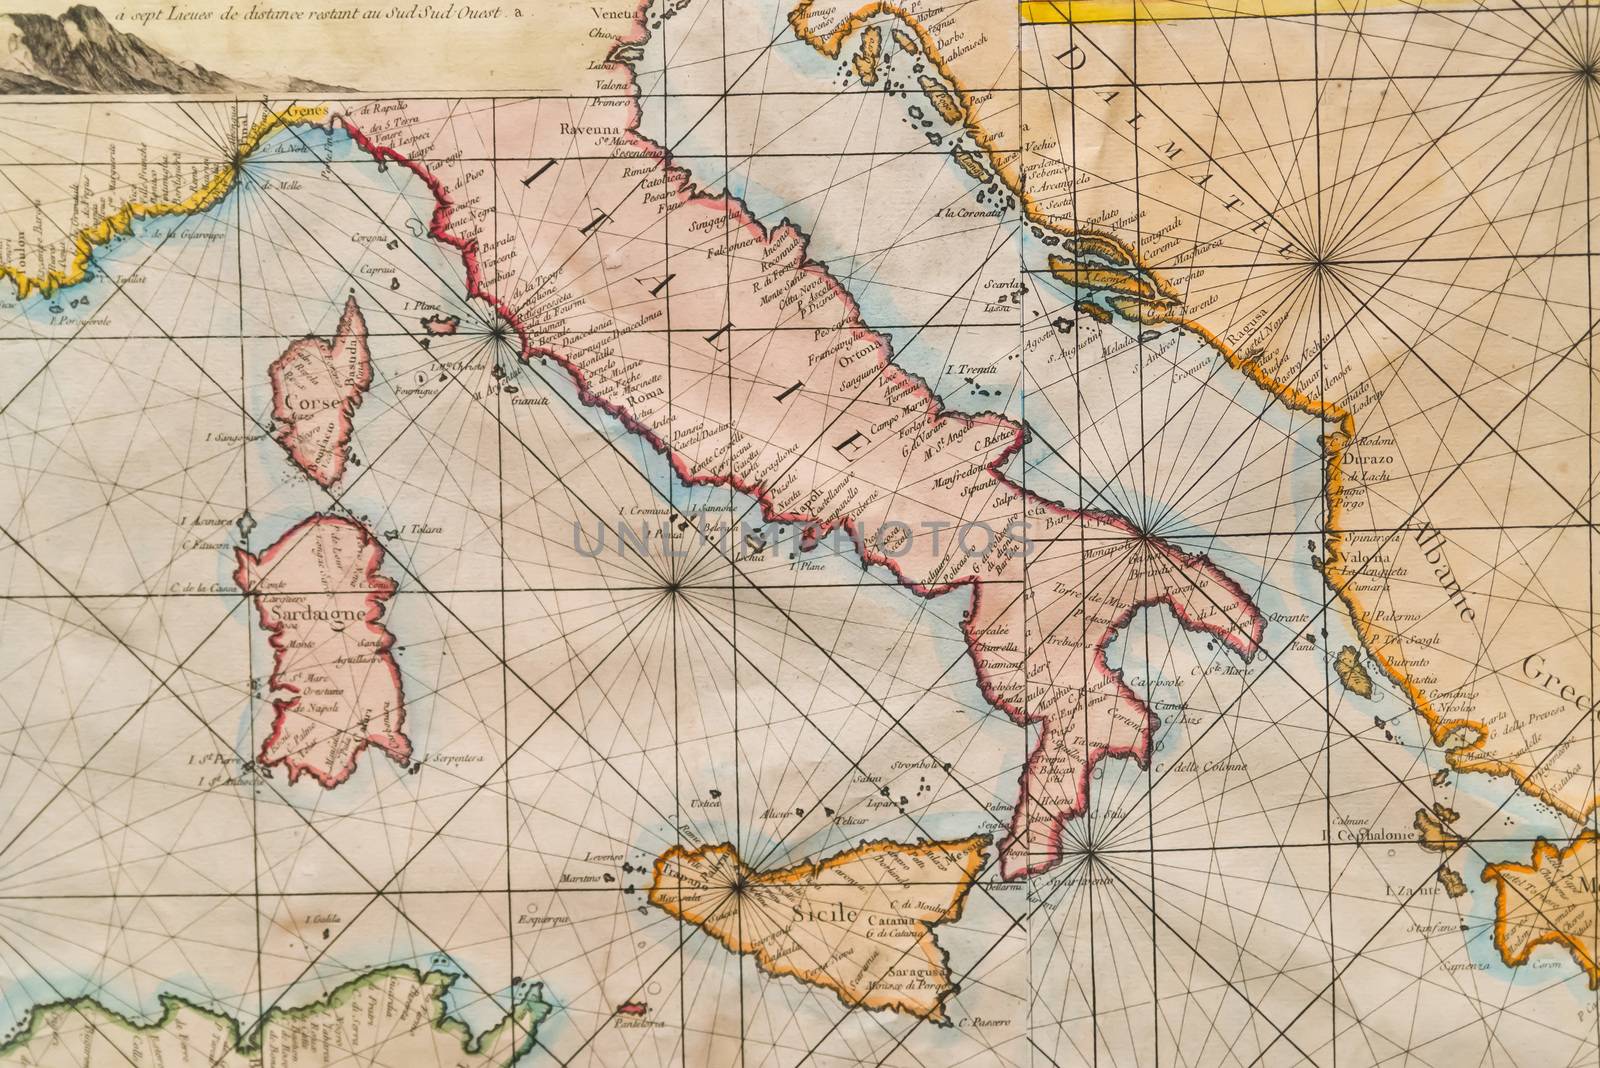 Old naval map of Italy, Sicily, Corsica and Sardinia